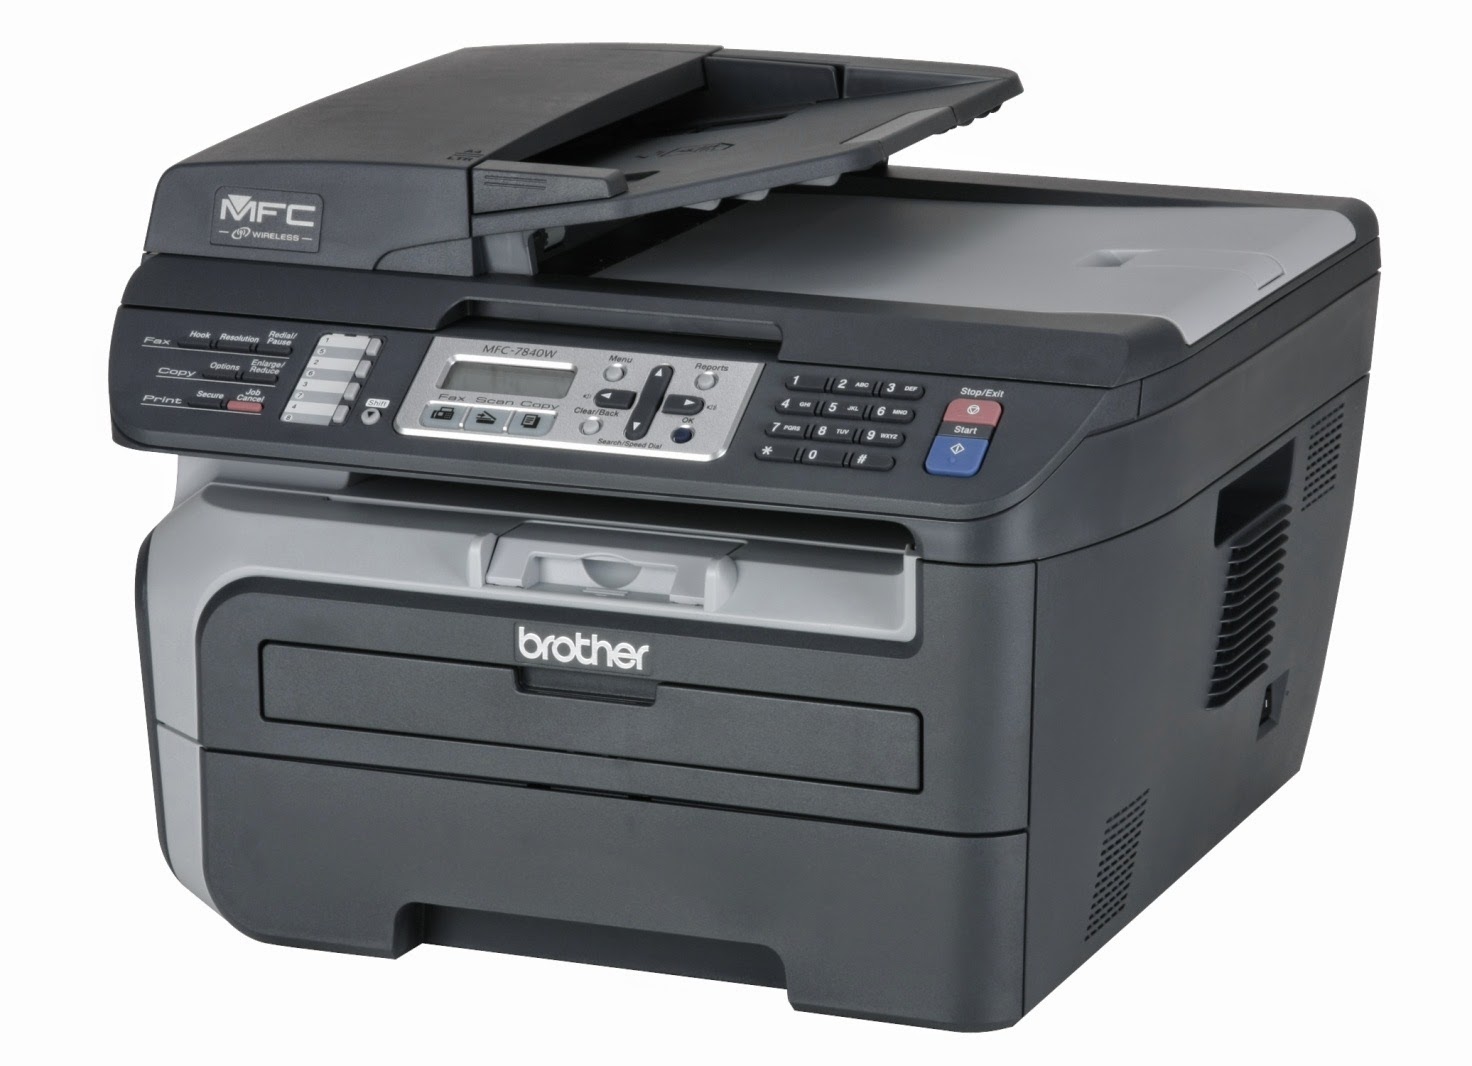 Support printers: How to reset the copier toner for the ...